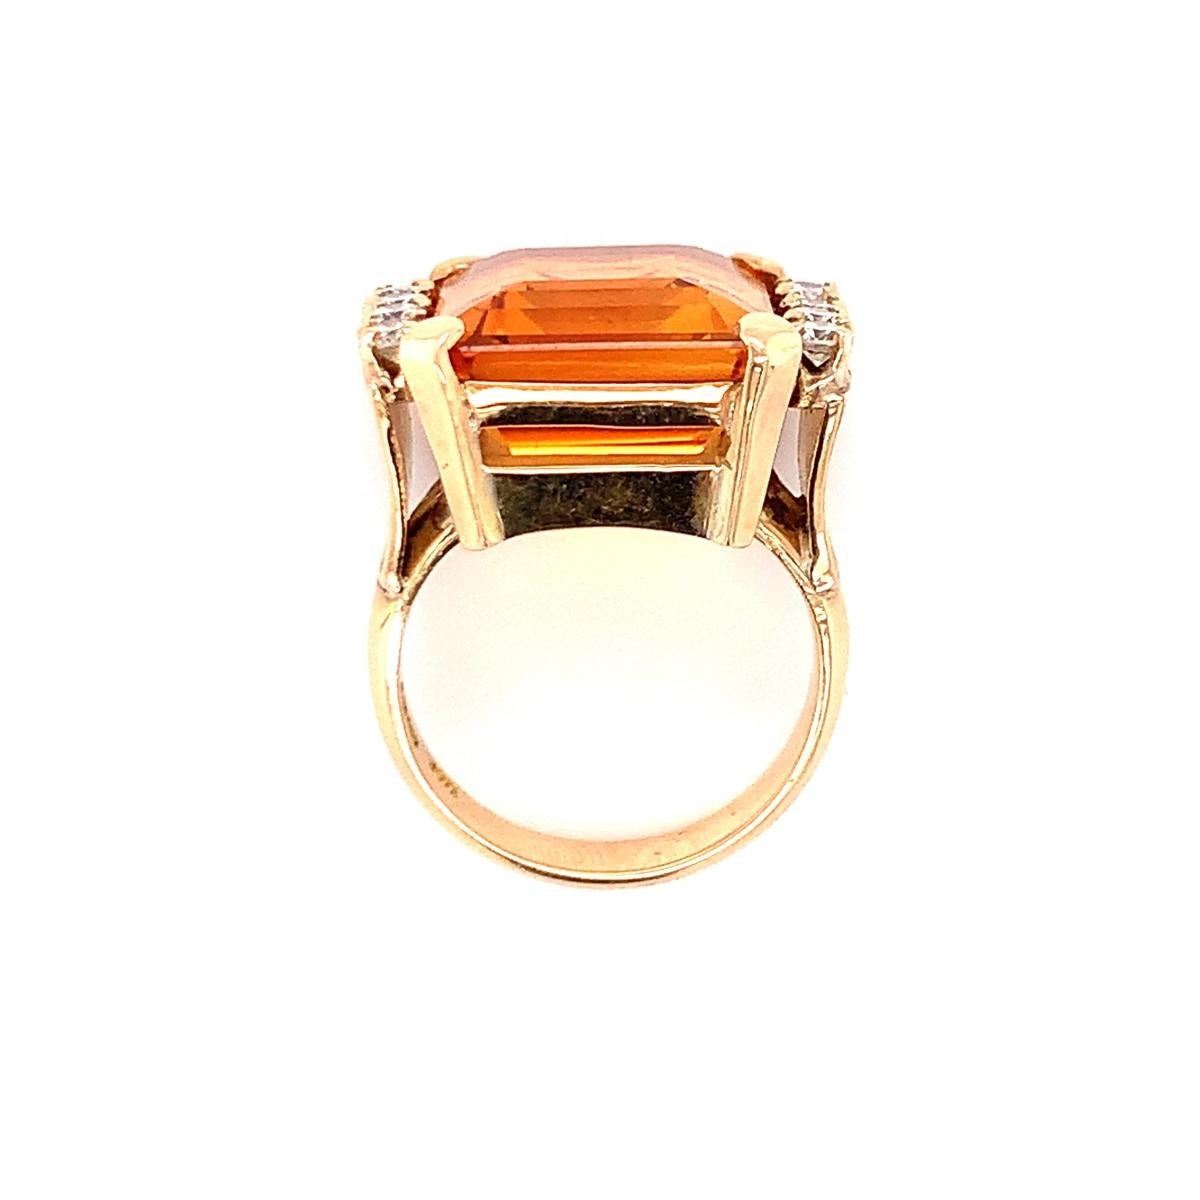 Women's Citrine and Diamond Ring in 18K Yellow Gold, circa 1960s For Sale